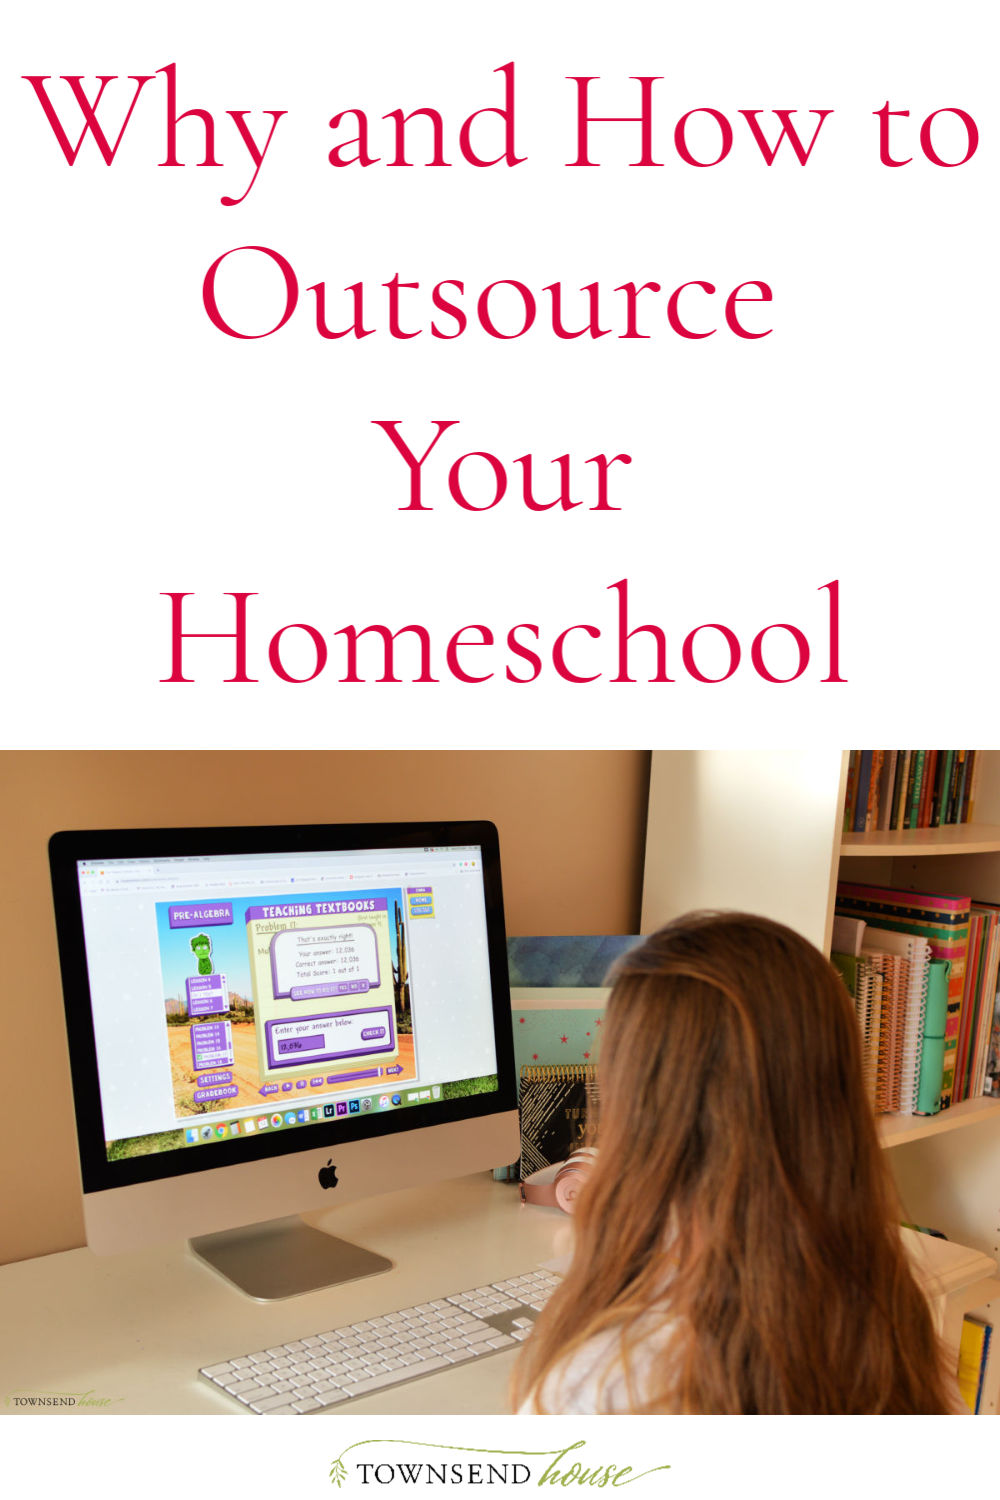 The Why and How for Outsourcing Homeschool